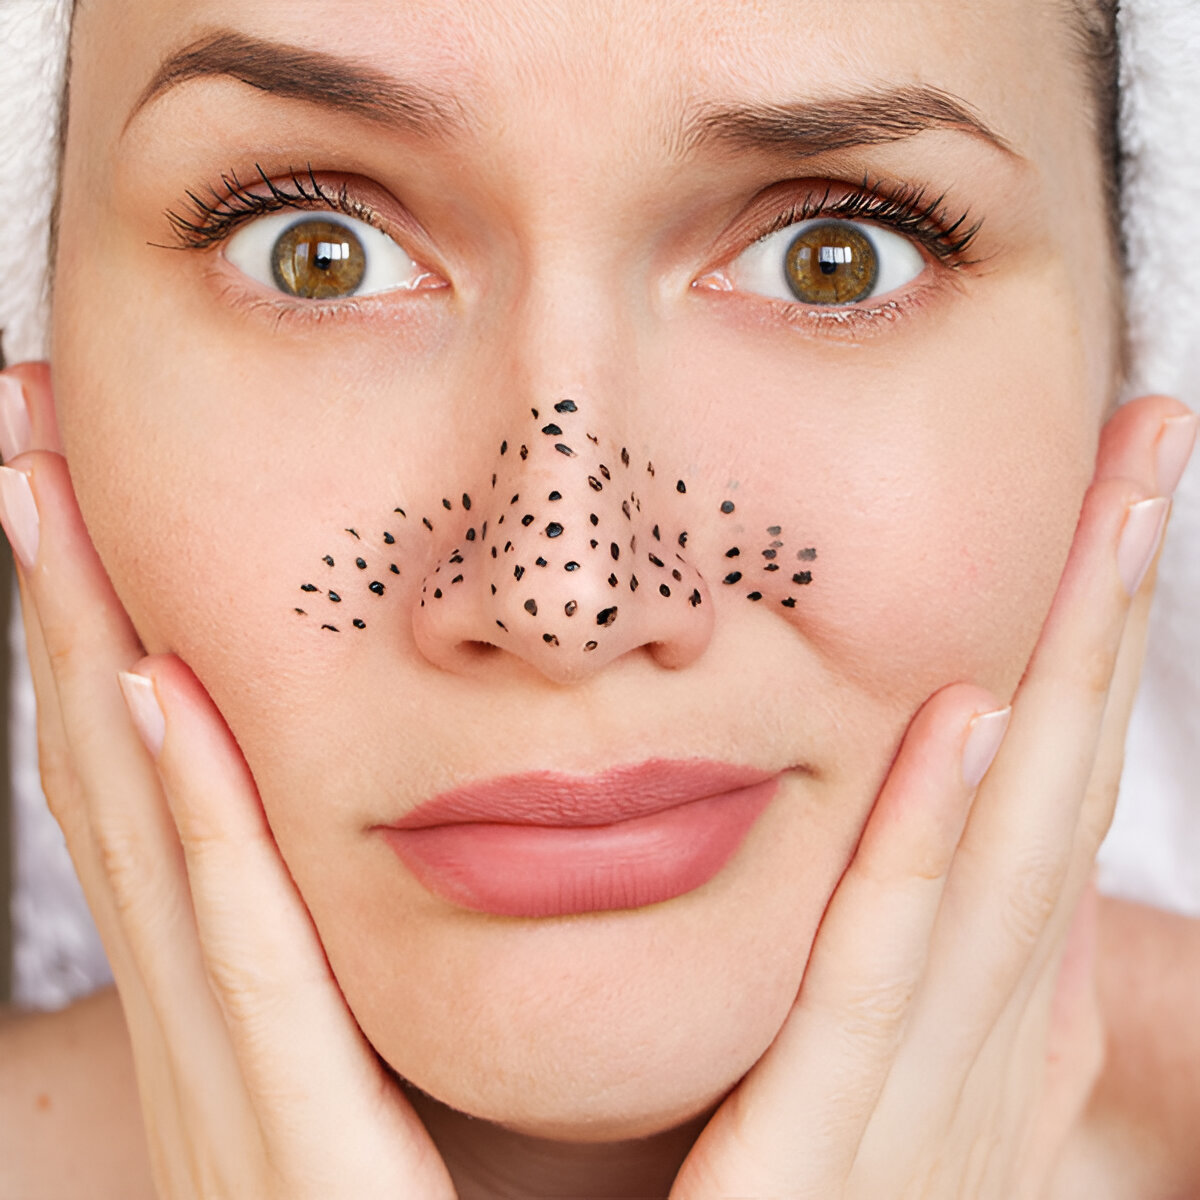 Remedies And Tips To Beat Blackheads